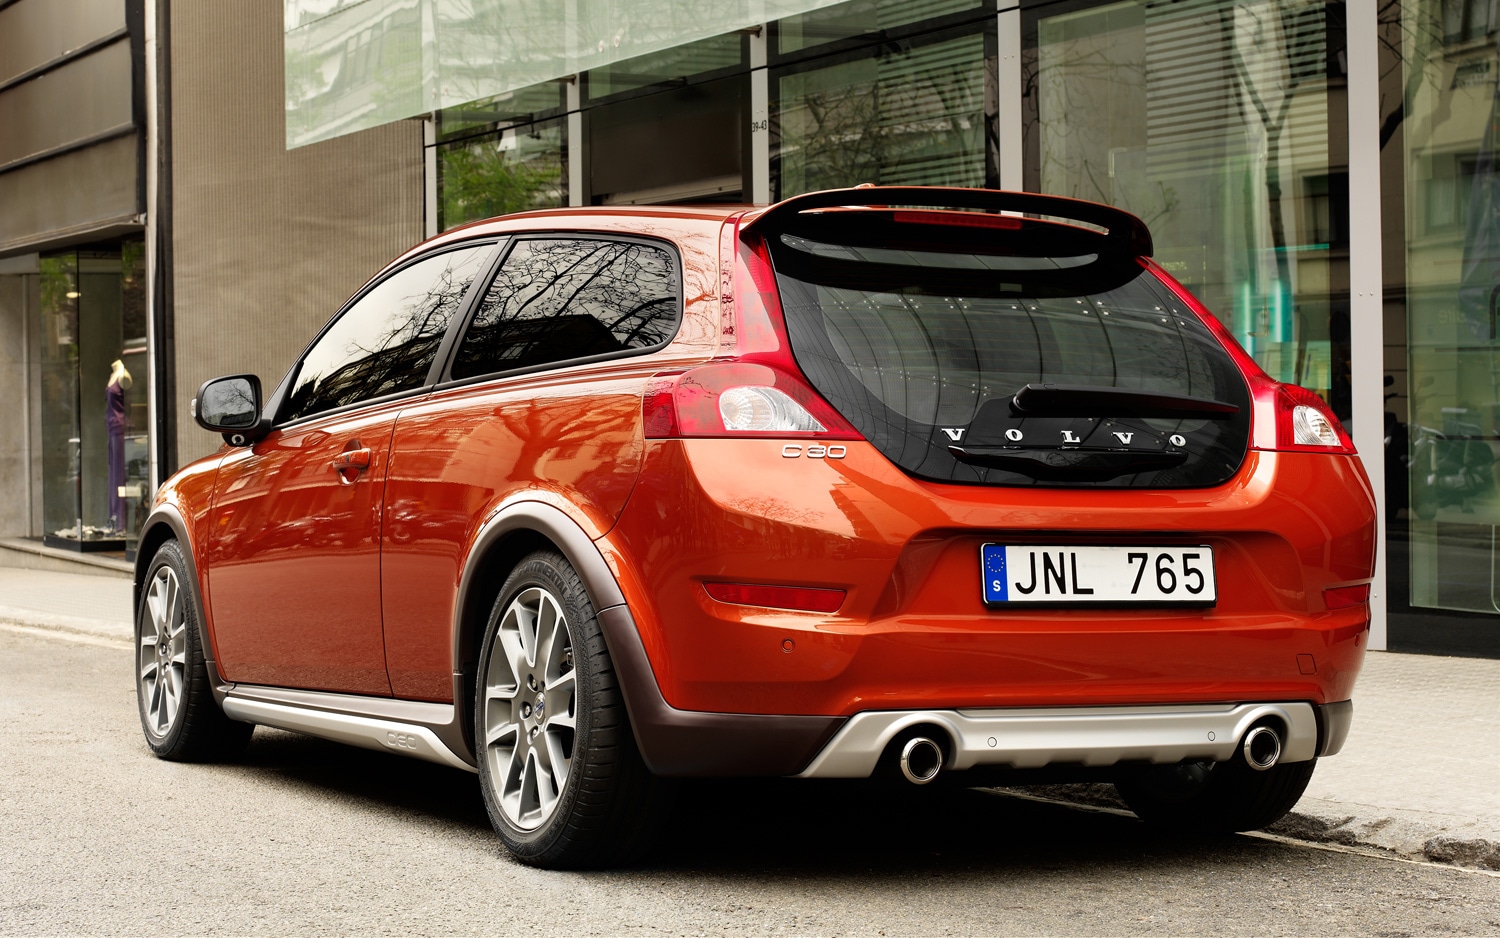 Official: Volvo Discontinuing C30 Hatchback After This Year